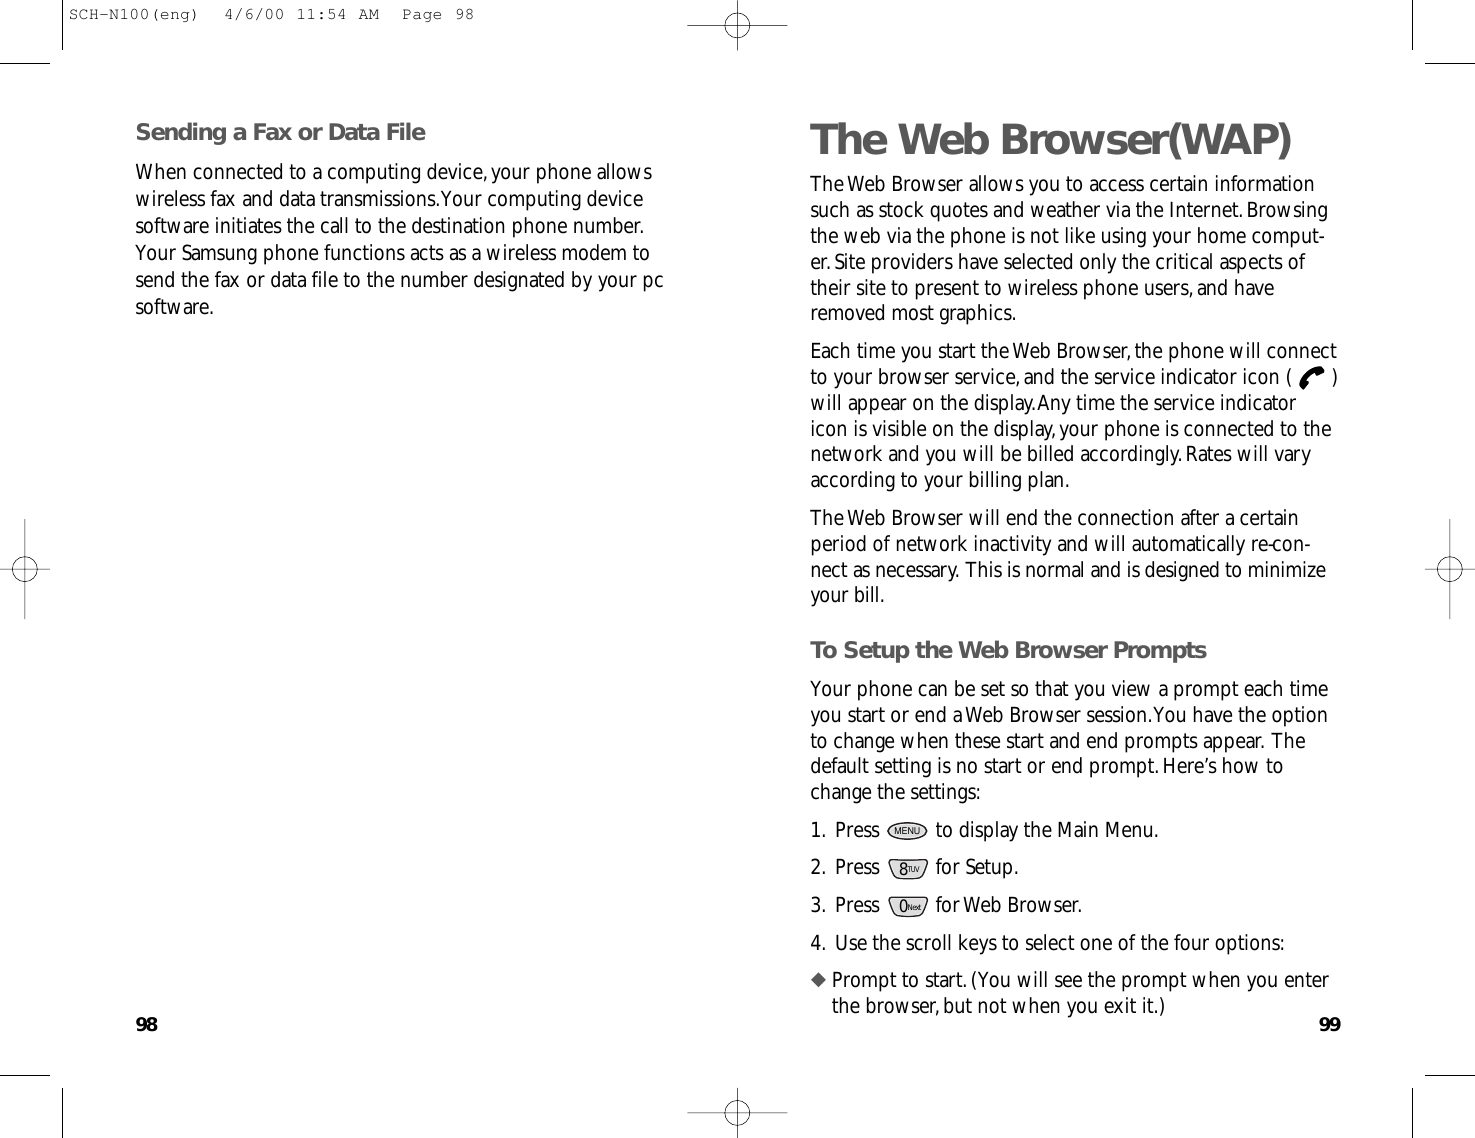 9998The Web Browser(WAP)The Web Browser allows you to access certain informationsuch as stock quotes and weather via the Internet.Browsingthe web via the phone is not like using your home comput-er.Site providers have selected only the critical aspects oftheir site to present to wireless phone users,and haveremoved most graphics.Each time you start the Web Browser,the phone will connectto your browser service,and the service indicator icon ( )will appear on the display.Any time the service indicatoricon is visible on the display,your phone is connected to thenetwork and you will be billed accordingly.Rates will varyaccording to your billing plan.The Web Browser will end the connection after a certainperiod of network inactivity and will automatically re-con-nect as necessary.This is normal and is designed to minimizeyour bill.To Setup the Web Browser PromptsYour phone can be set so that you view a prompt each timeyou start or end a Web Browser session.You have the optionto change when these start and end prompts appear.Thedefault setting is no start or end prompt.Here’s how tochange the settings:1.Press  to display the Main Menu.2.Press for Setup.3.Press for Web Browser.4.Use the scroll keys to select one of the four options:◆ Prompt to start.(You will see the prompt when you enterthe browser,but not when you exit it.)0Next8TUVMENUSending a Fax or Data FileWhen connected to a computing device,your phone allowswireless fax and data transmissions.Your computing devicesoftware initiates the call to the destination phone number.Your Samsung phone functions acts as a wireless modem tosend the fax or data file to the number designated by your pcsoftware.SCH-N100(eng)  4/6/00 11:54 AM  Page 98